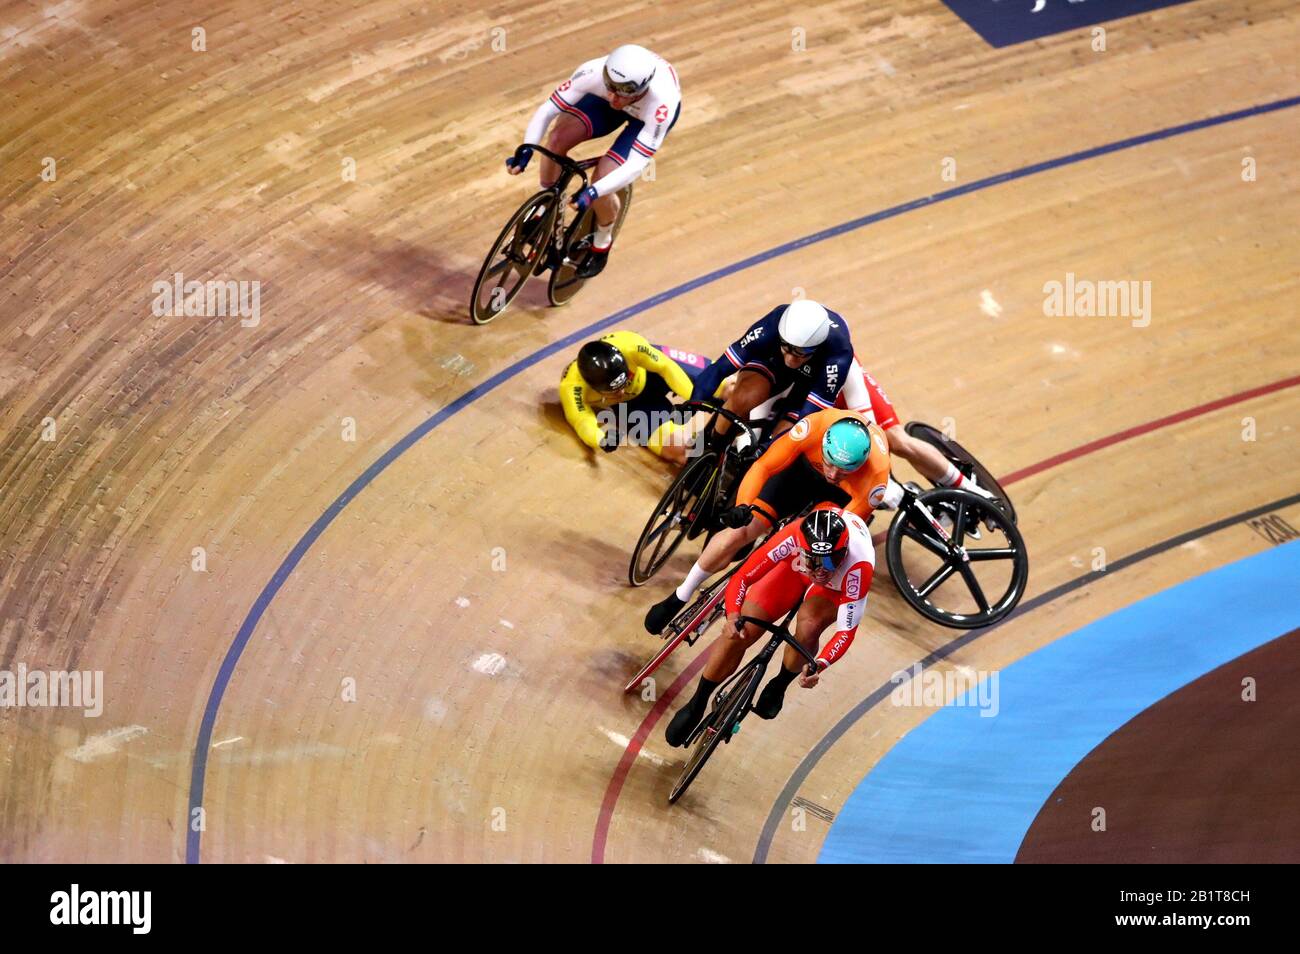 Track Cycling Crash High Resolution Stock Photography And Images Alamy